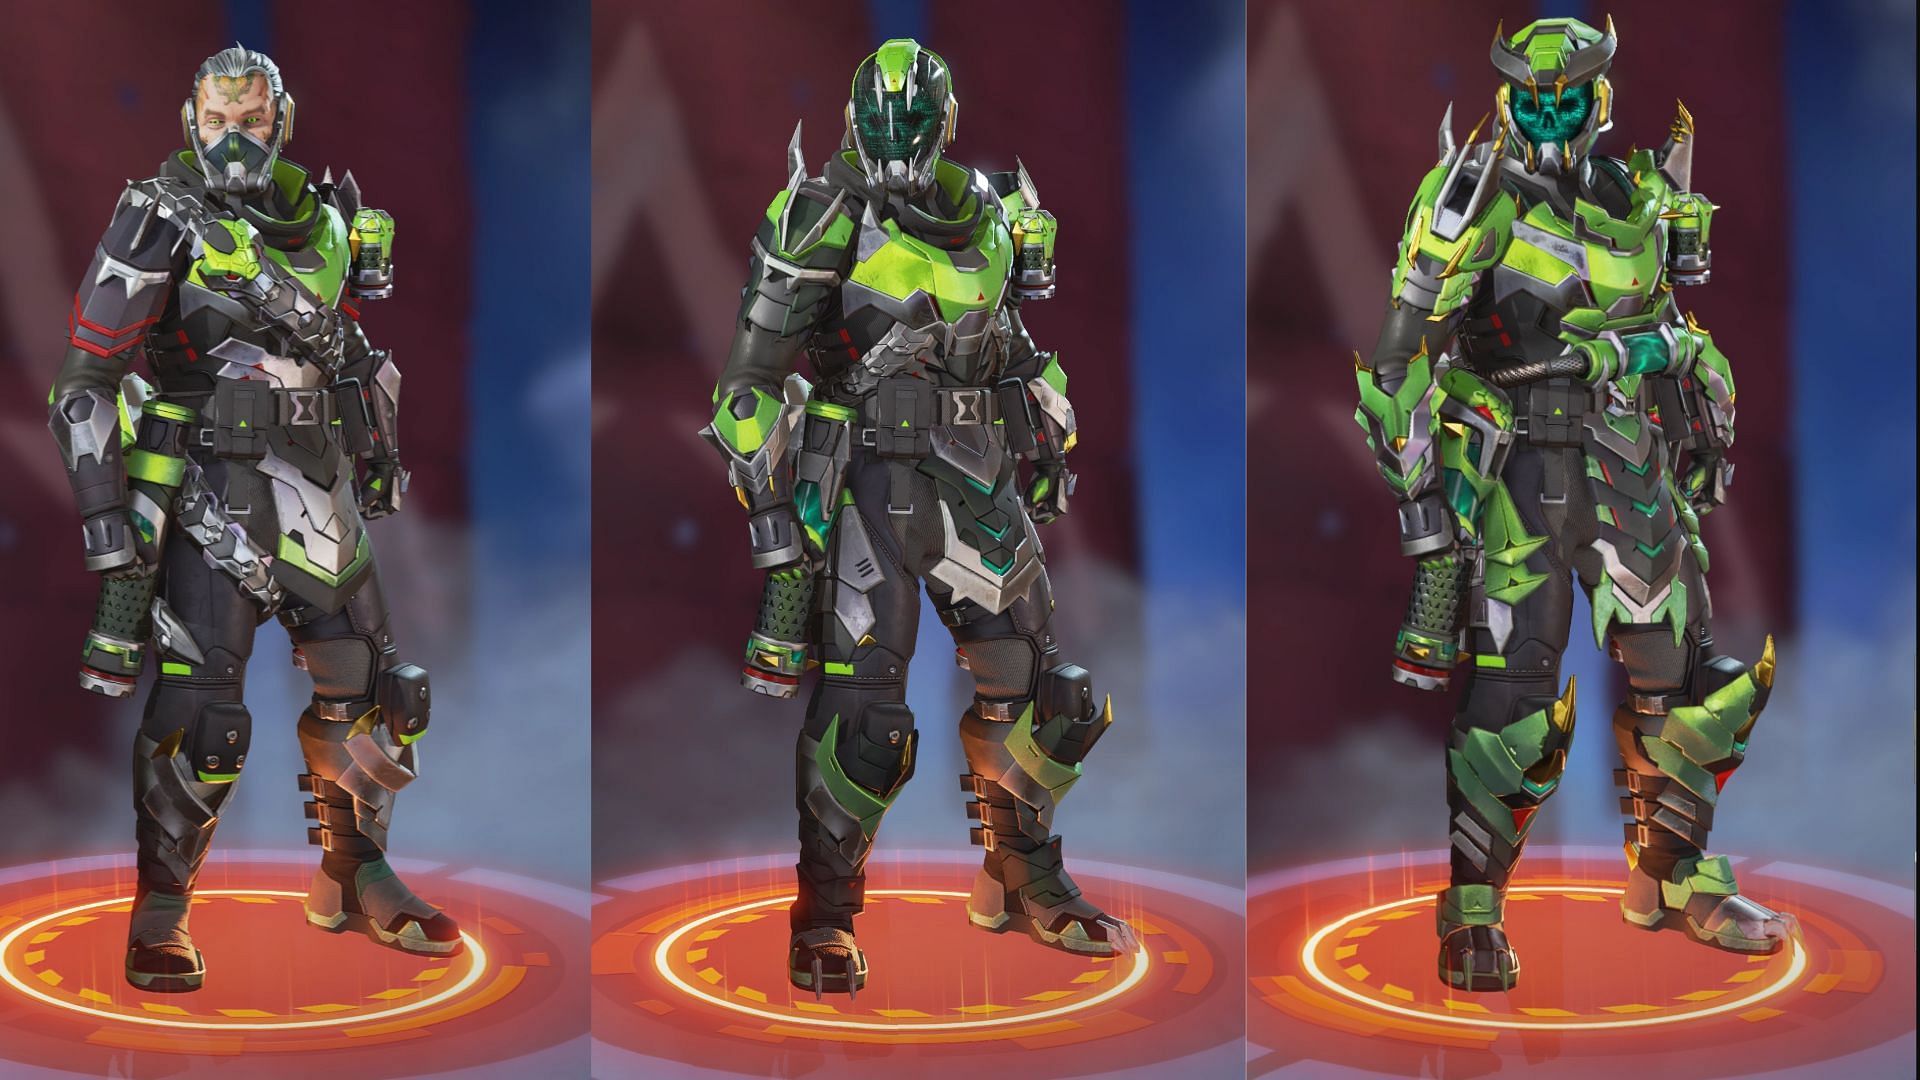 Apex Contagion Mythic Caustic skin in Apex Legends (Image via Electronic Arts)